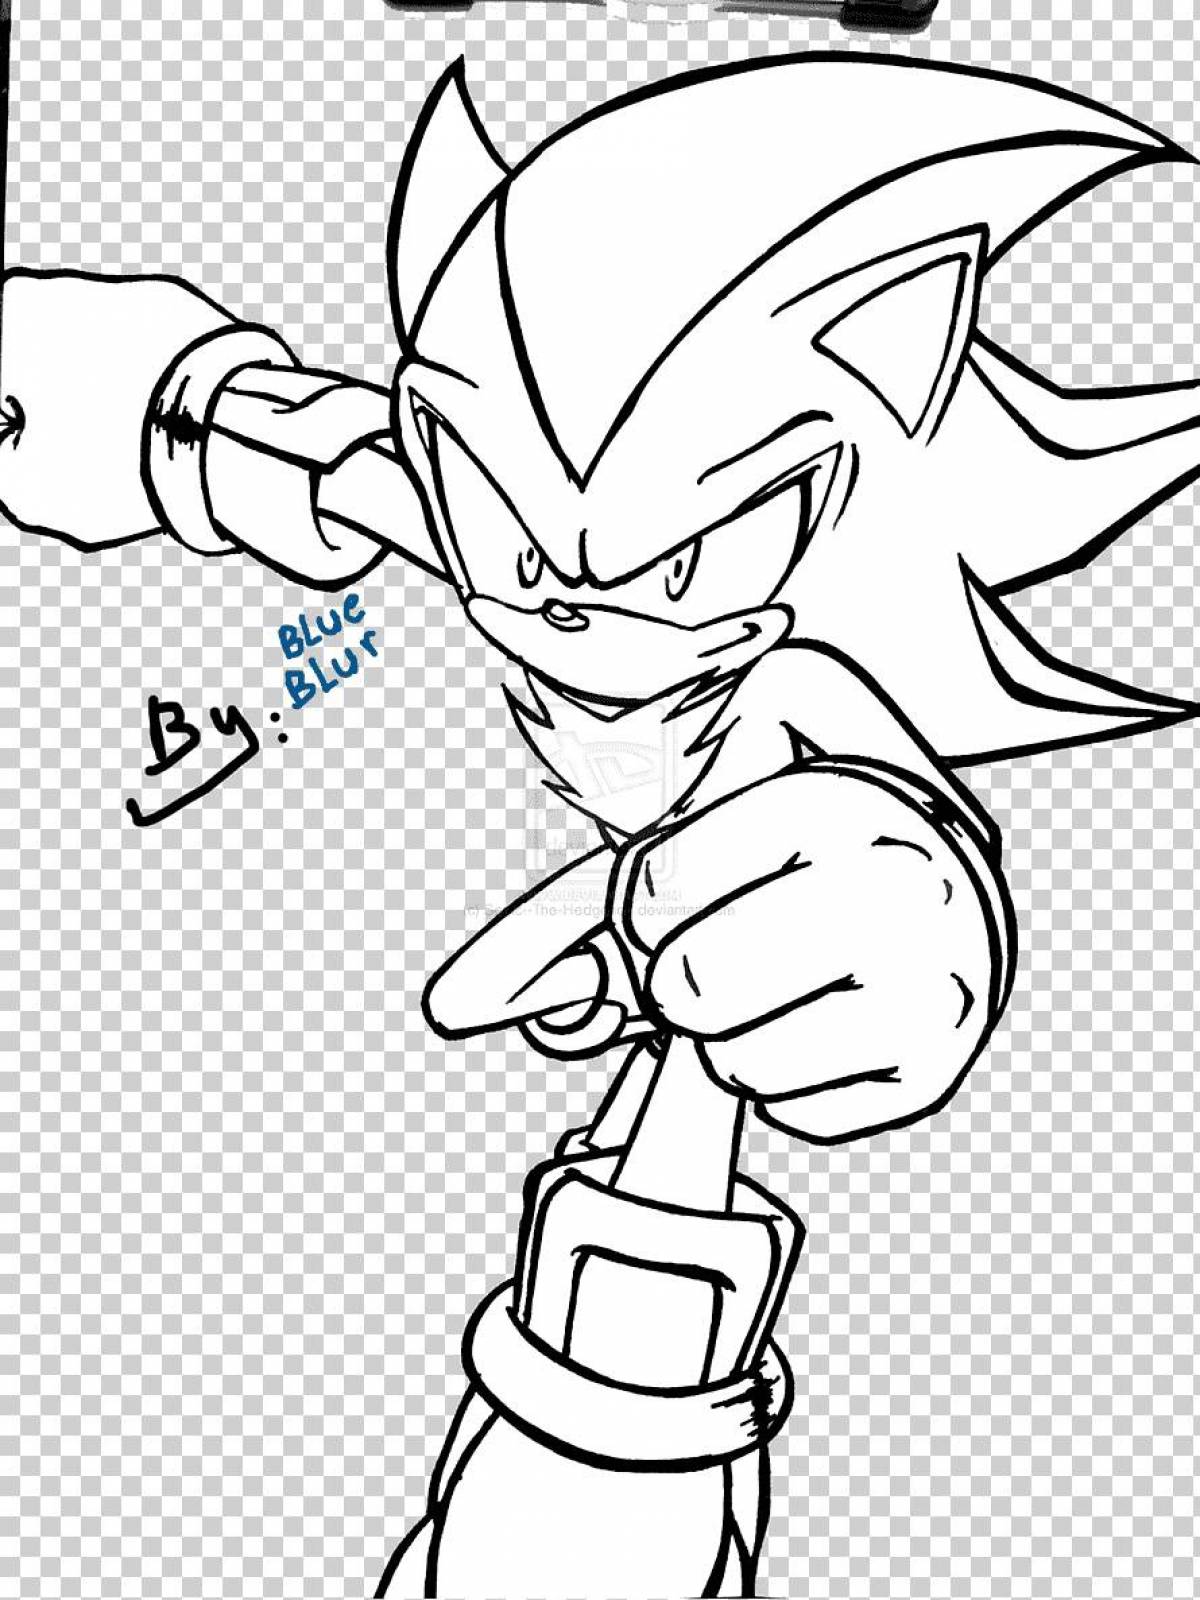 Fine sonic shadow coloring